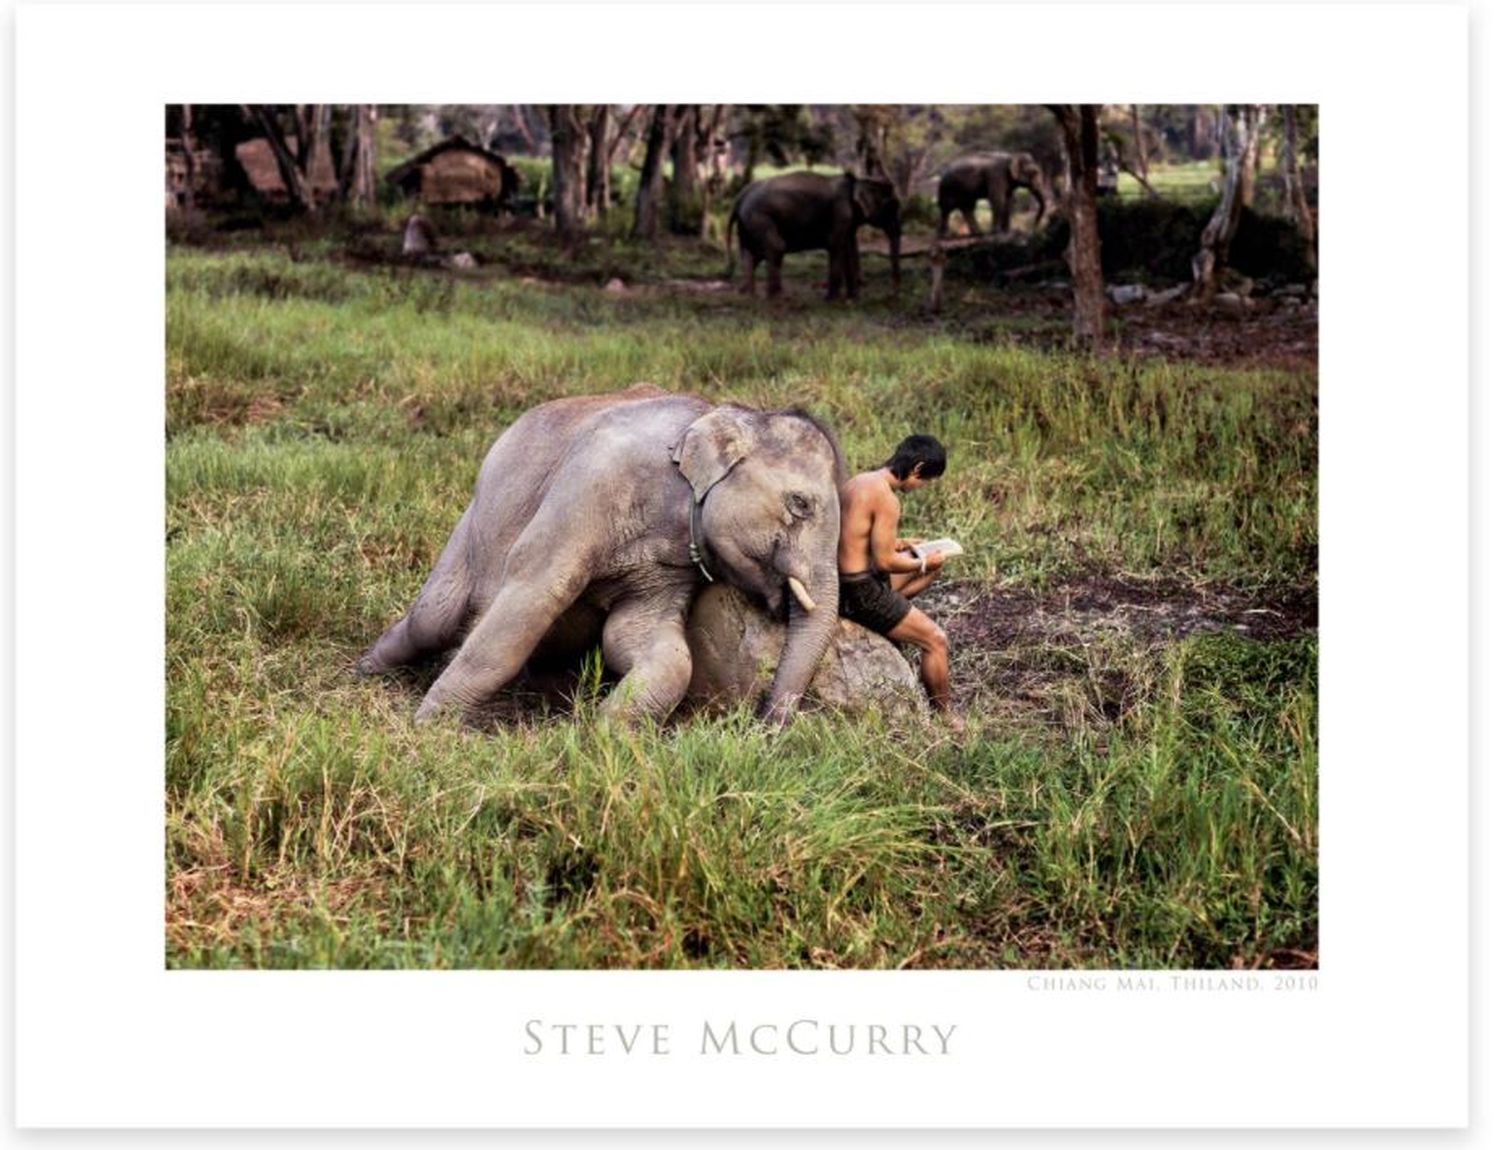 Steve McCurry Steve McCurry
Mahout Reads With His Elephant

Impression sur papie&hellip;